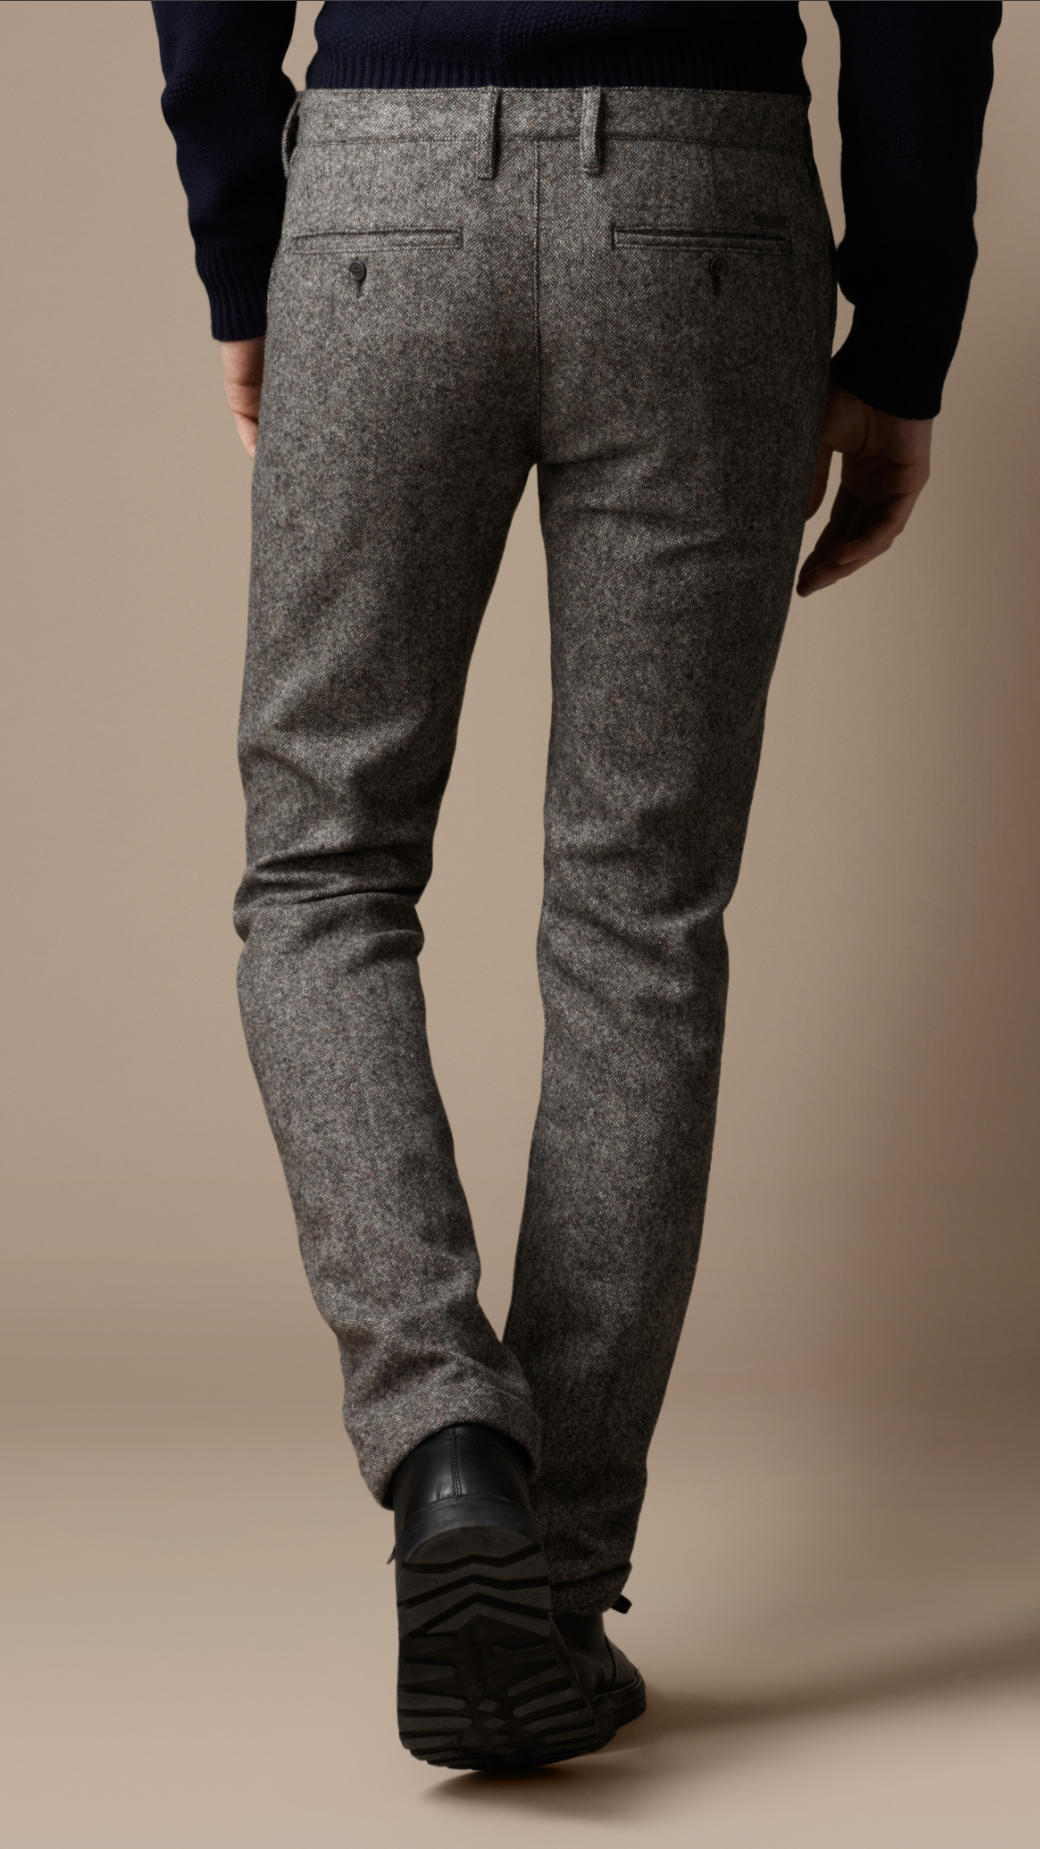 Burberry Brit Skinny Fit Wool Blend Trousers in Gray for Men - Lyst